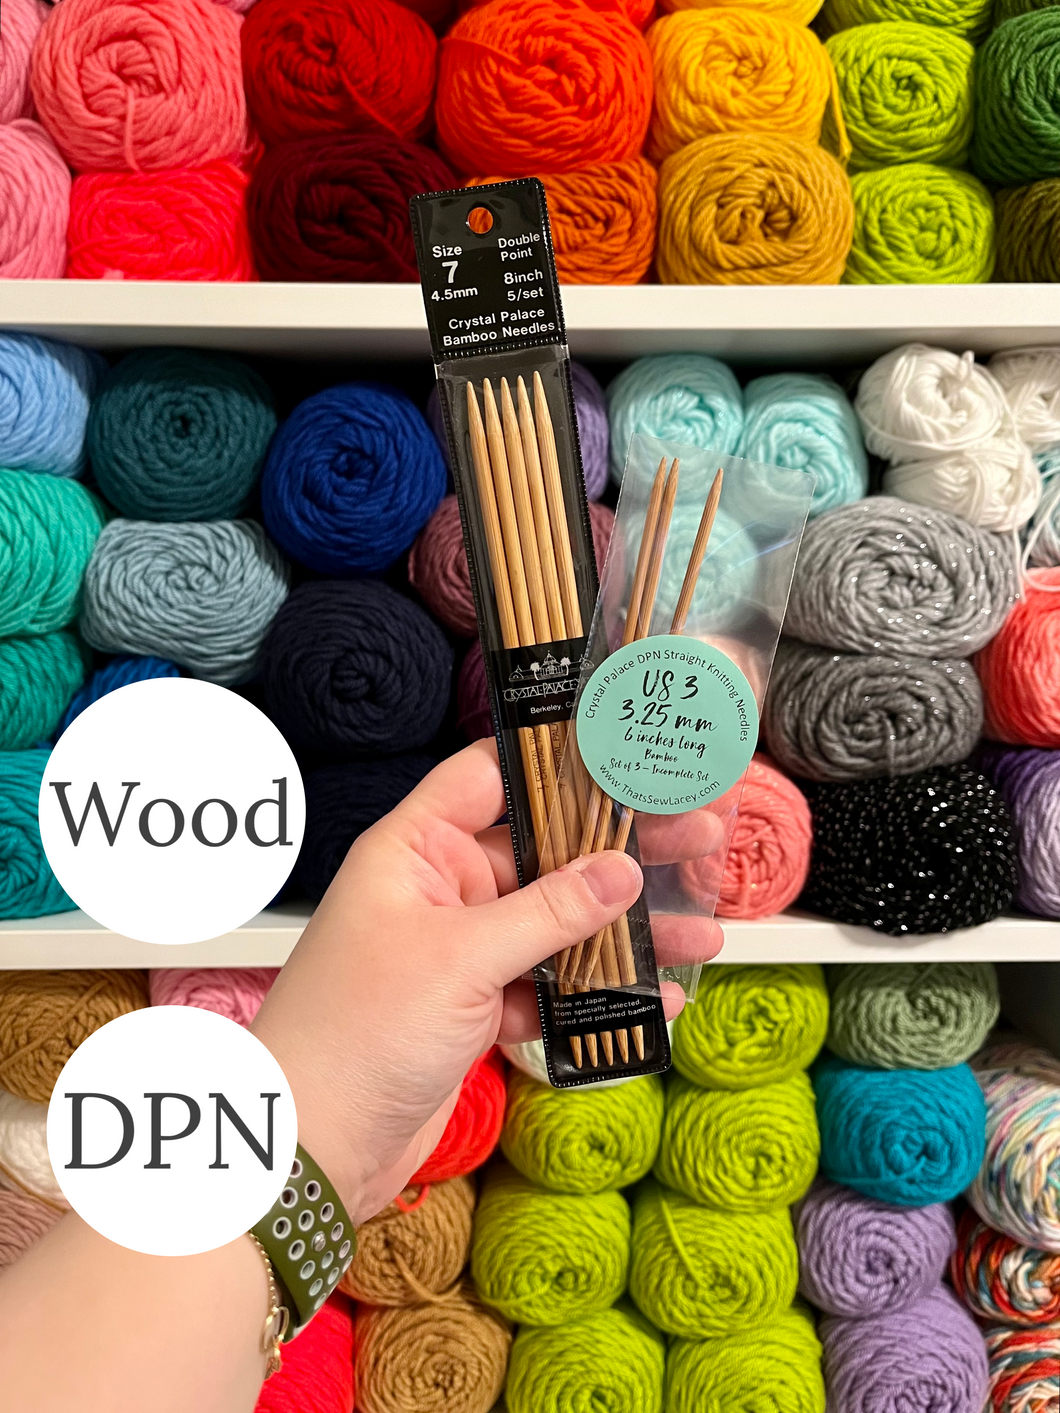 ALL Wood (DPN) Double Pointed Knitting Needles